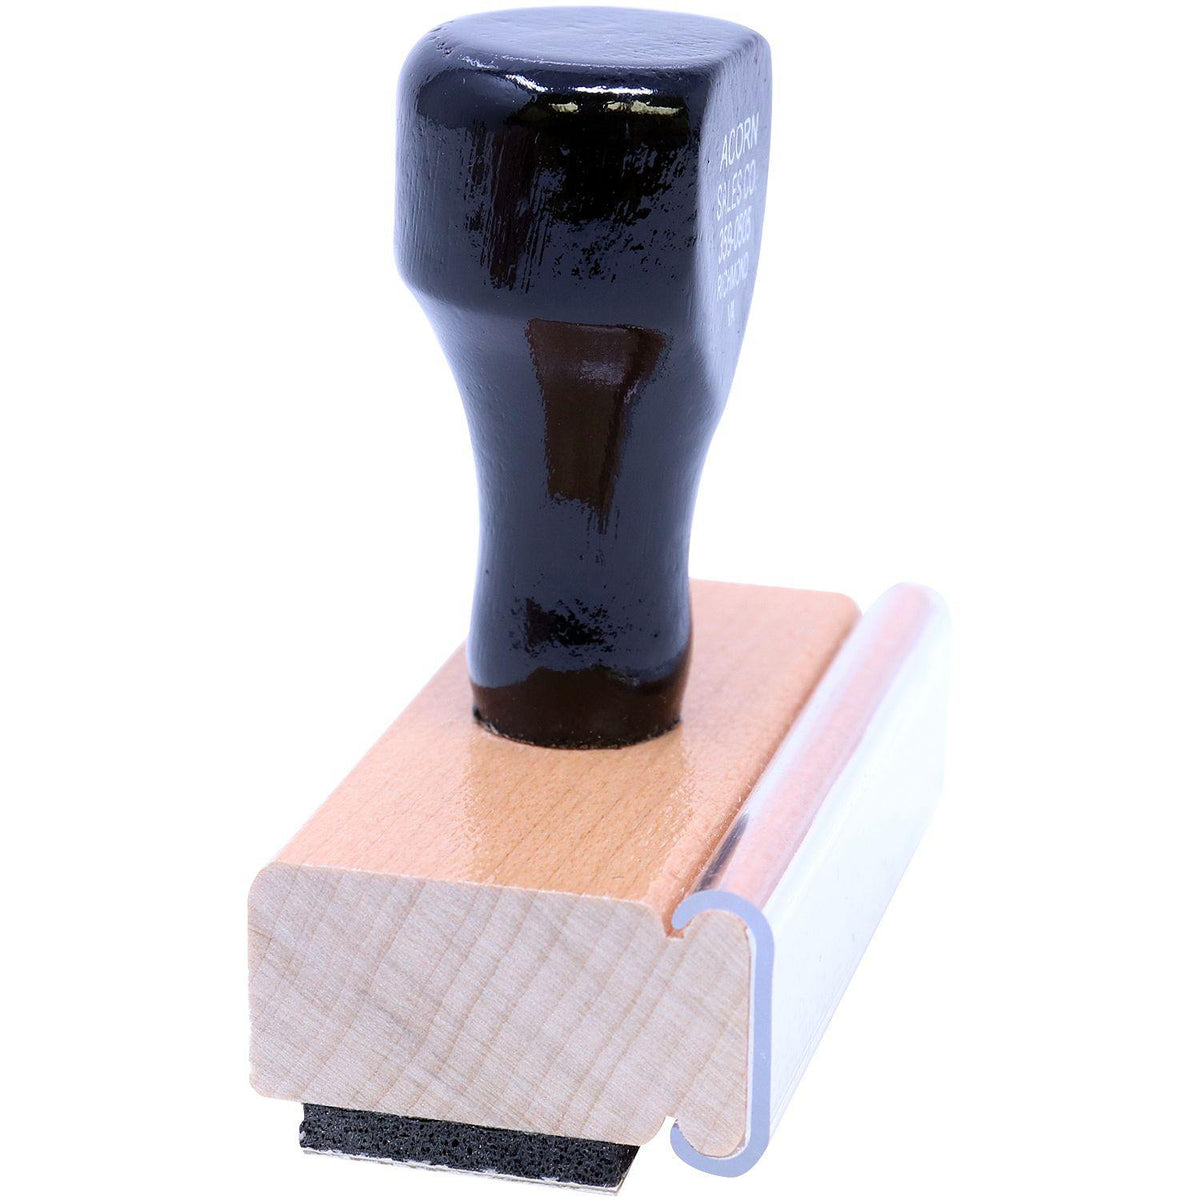 Side View of Devolver Copia Rubber Stamp at an Angle